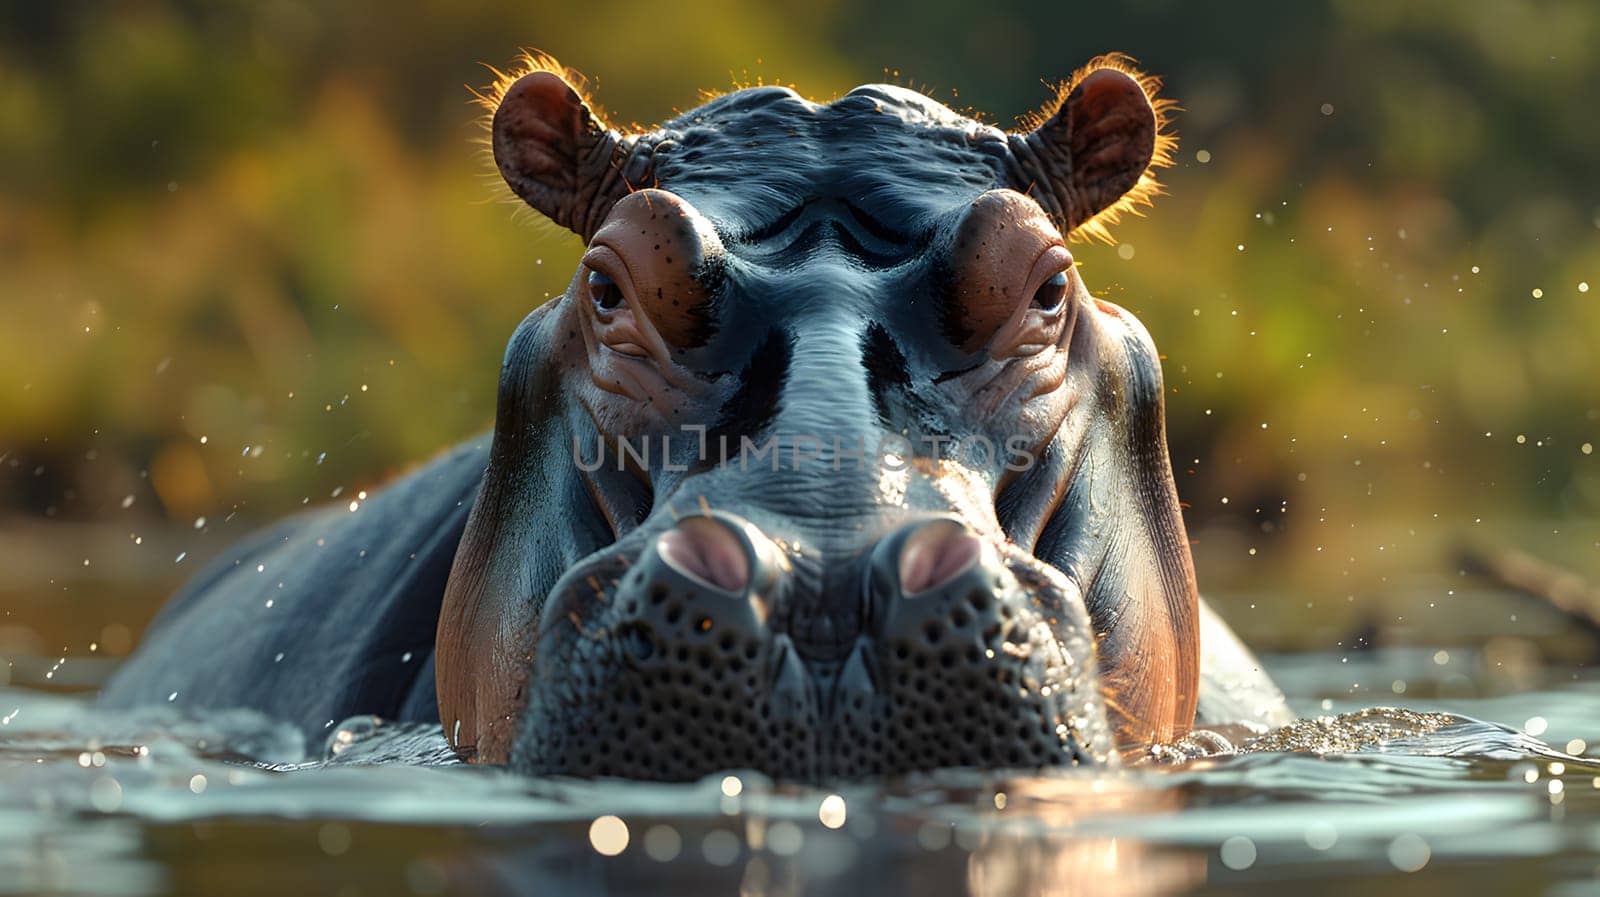 A hippopotamus, a terrestrial animal with powerful jaws and a large snout, is swimming in the water, gazing at the camera in its natural aquatic landscape